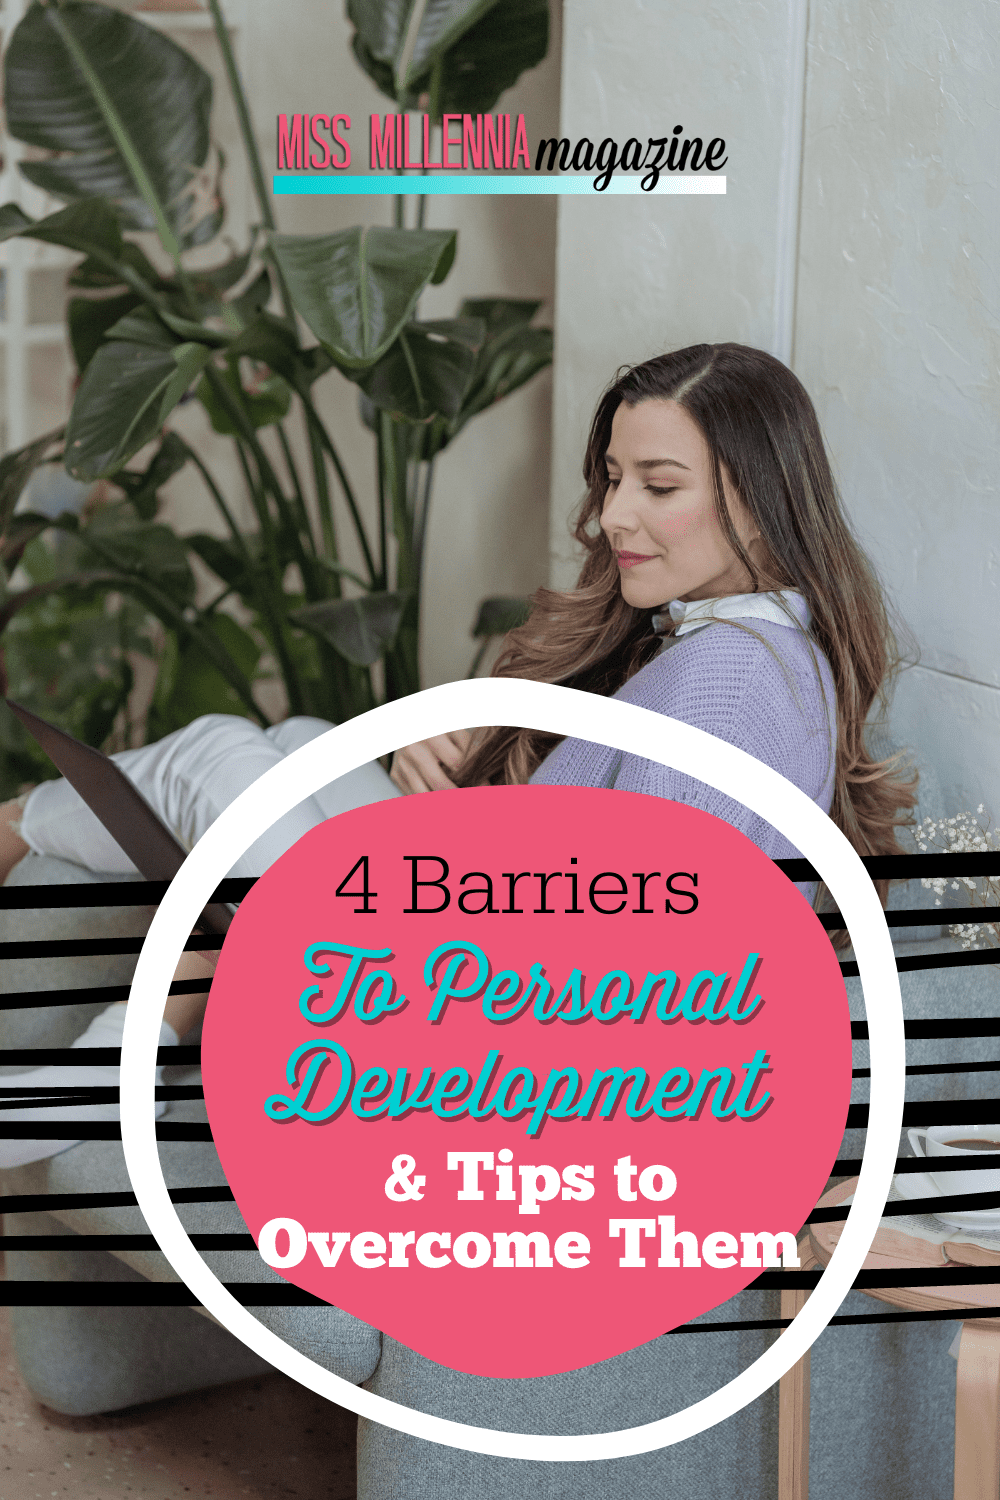 5 Barriers To Personal Development & Tips to Overcome Them